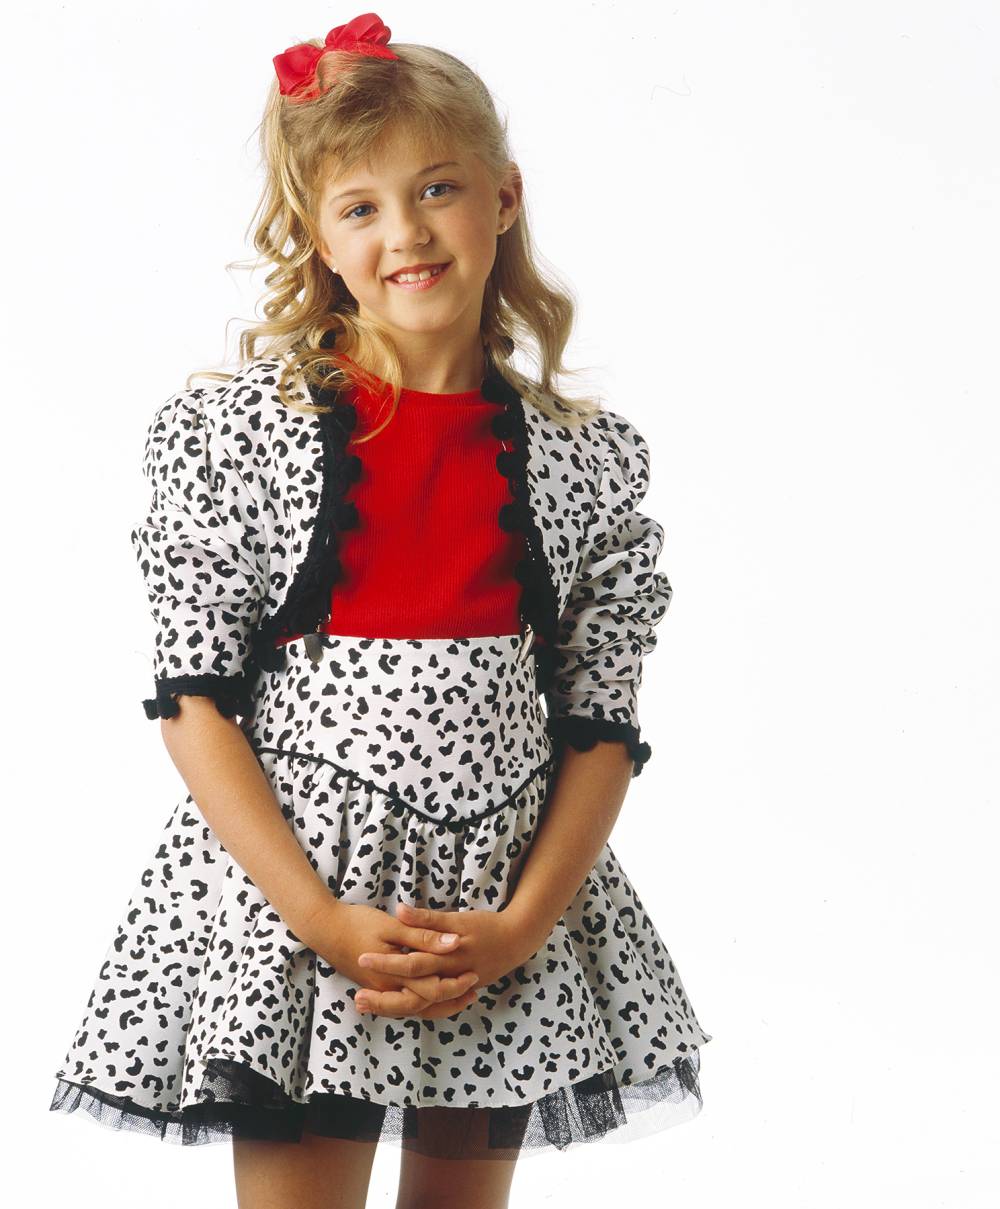 Jodie Sweetin in 1990